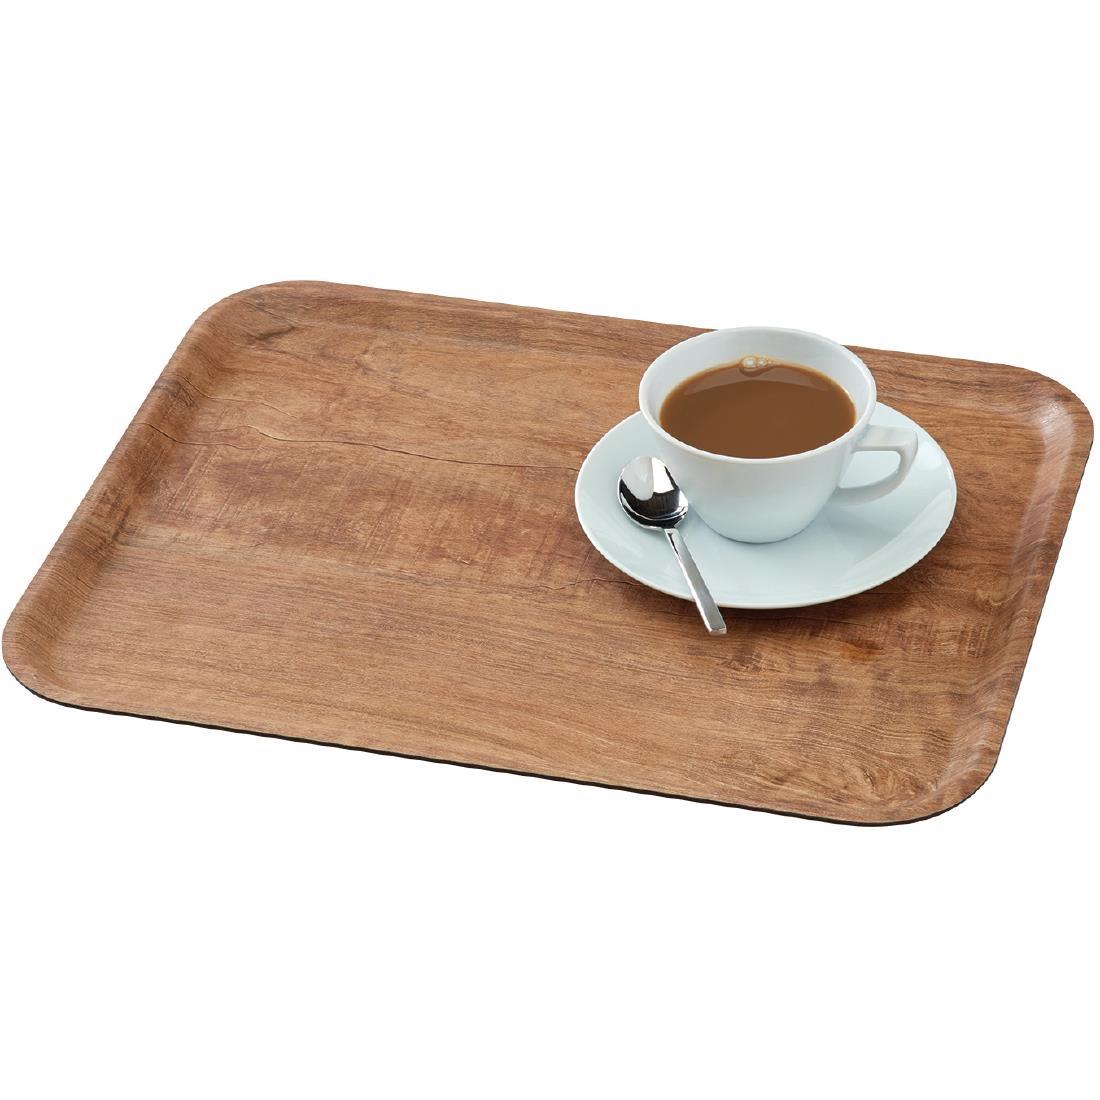 Cambro Madeira Laminate Canteen Tray Brown Olive 430mm - DR584  - 3